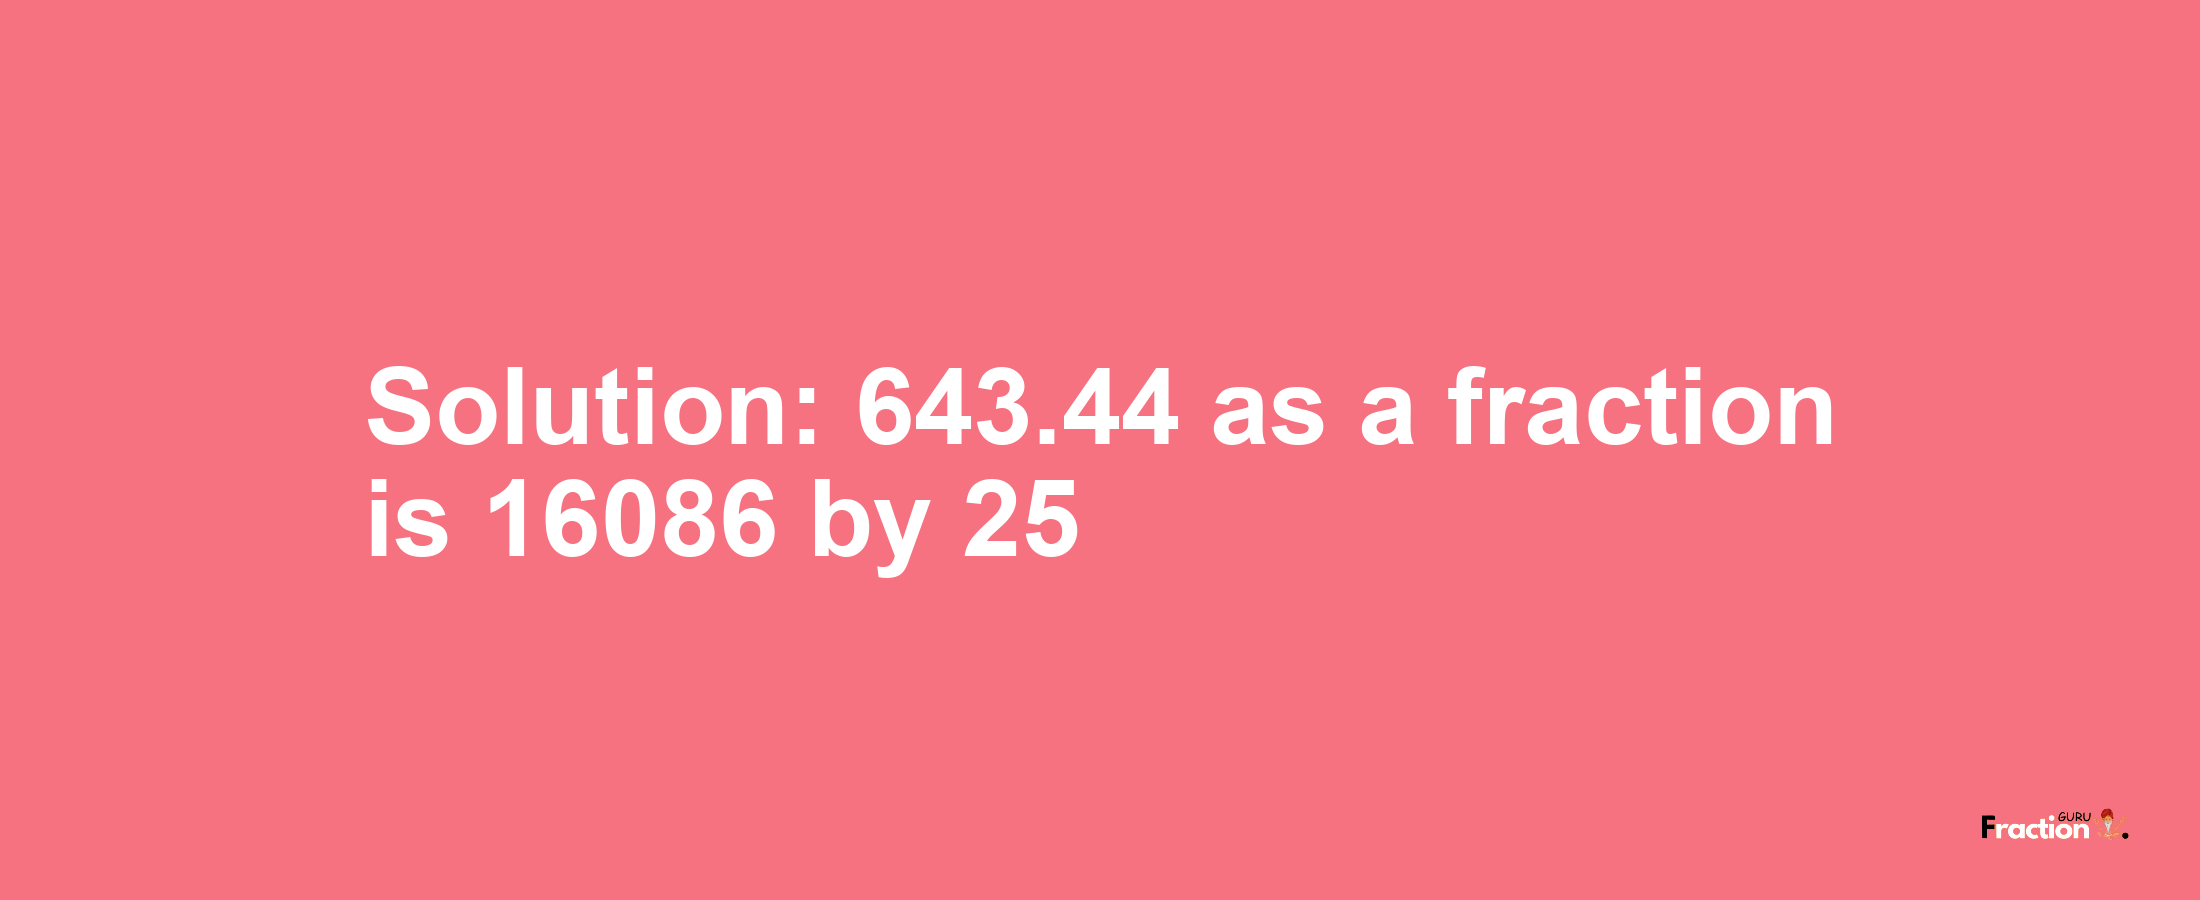 Solution:643.44 as a fraction is 16086/25